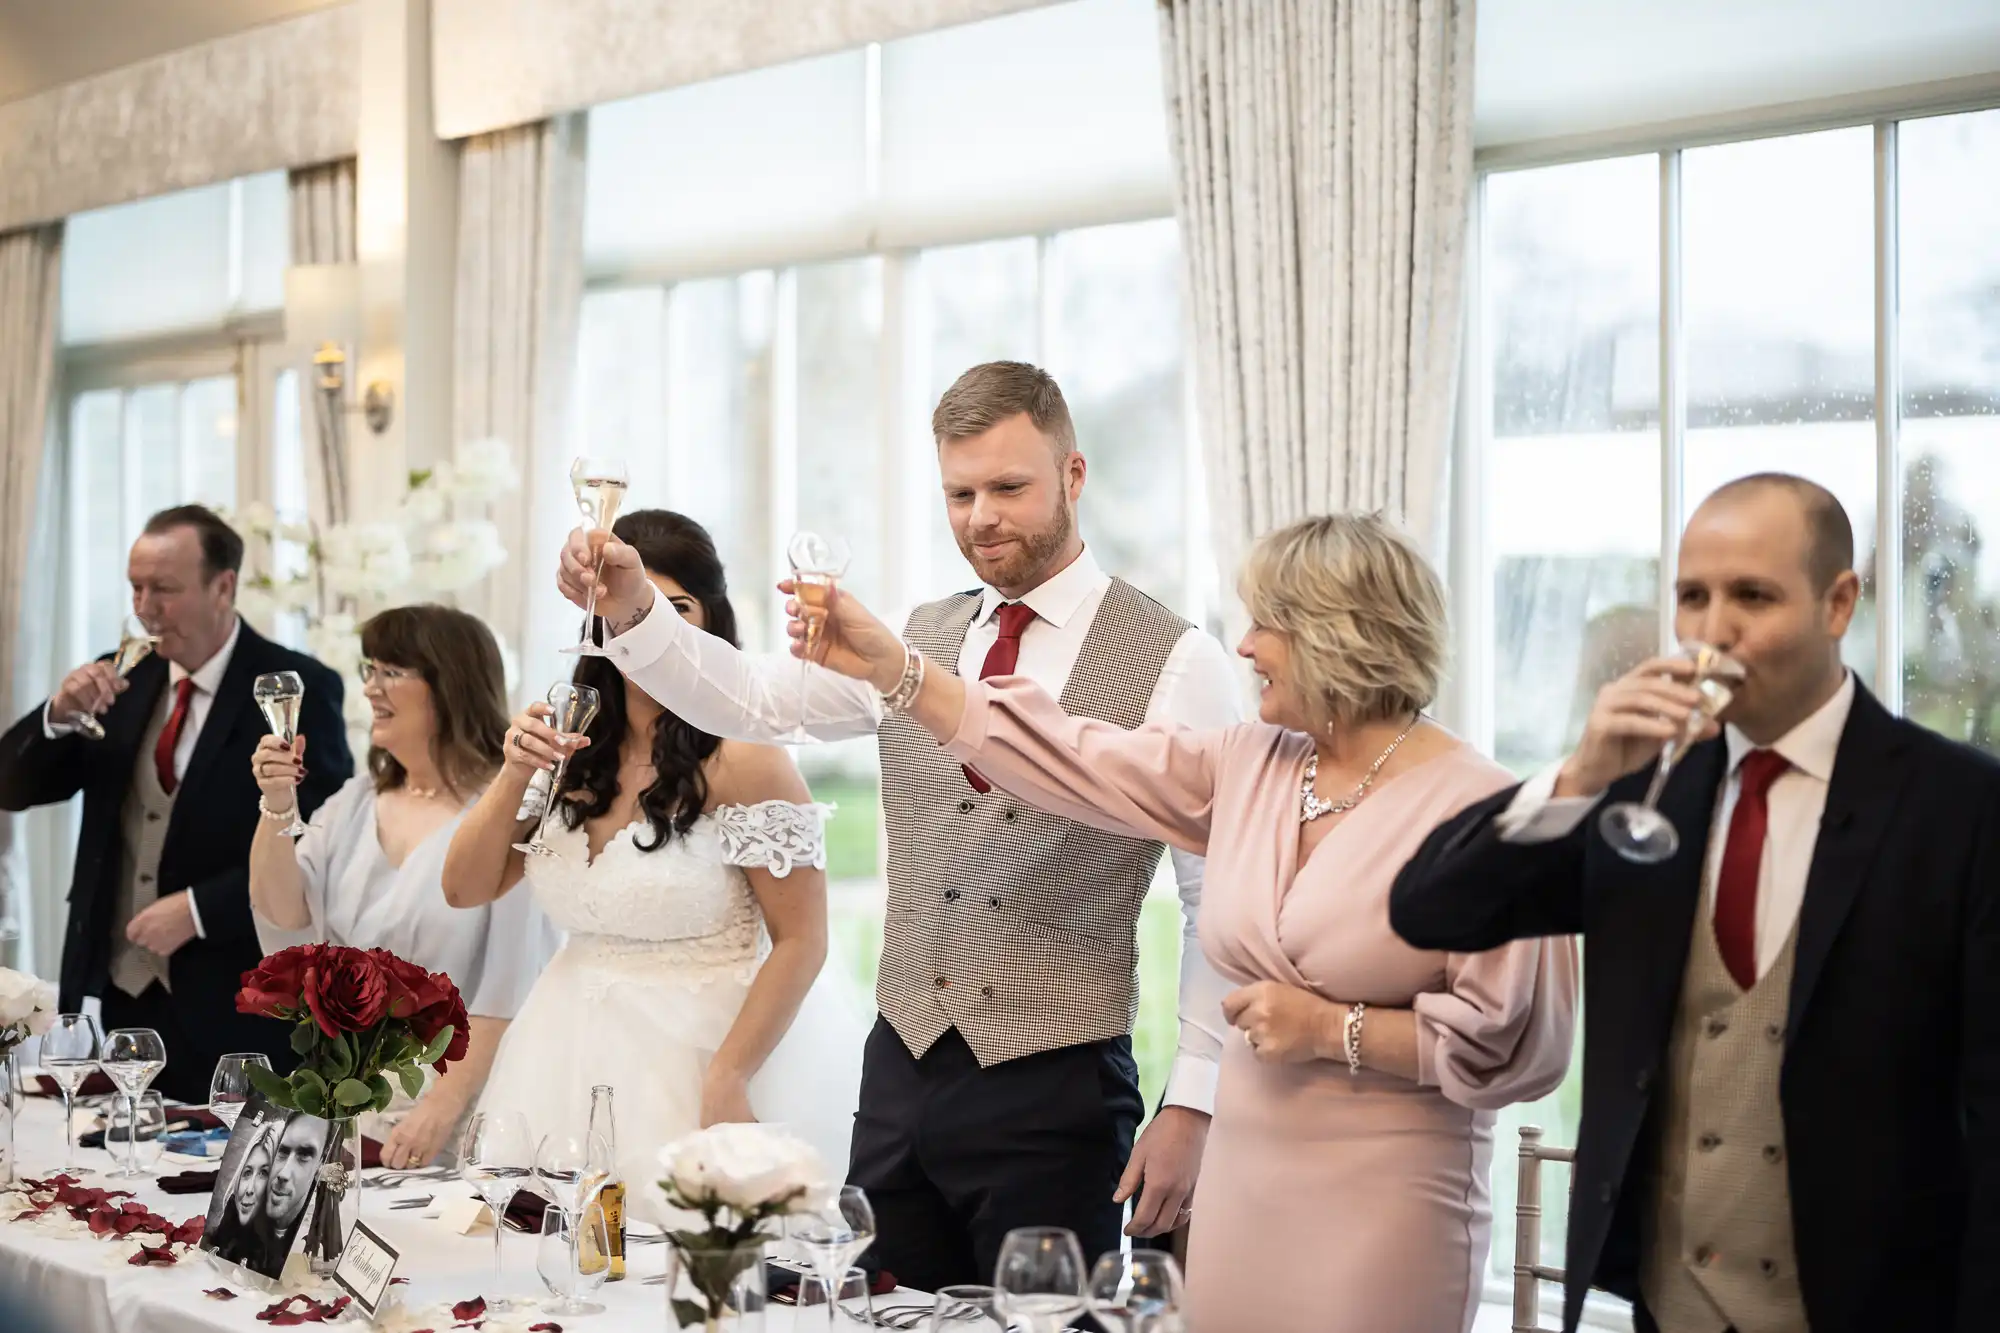 A wedding party, standing in a decorated room with large windows, raises their glasses for a toast at a long, flower-adorned table.